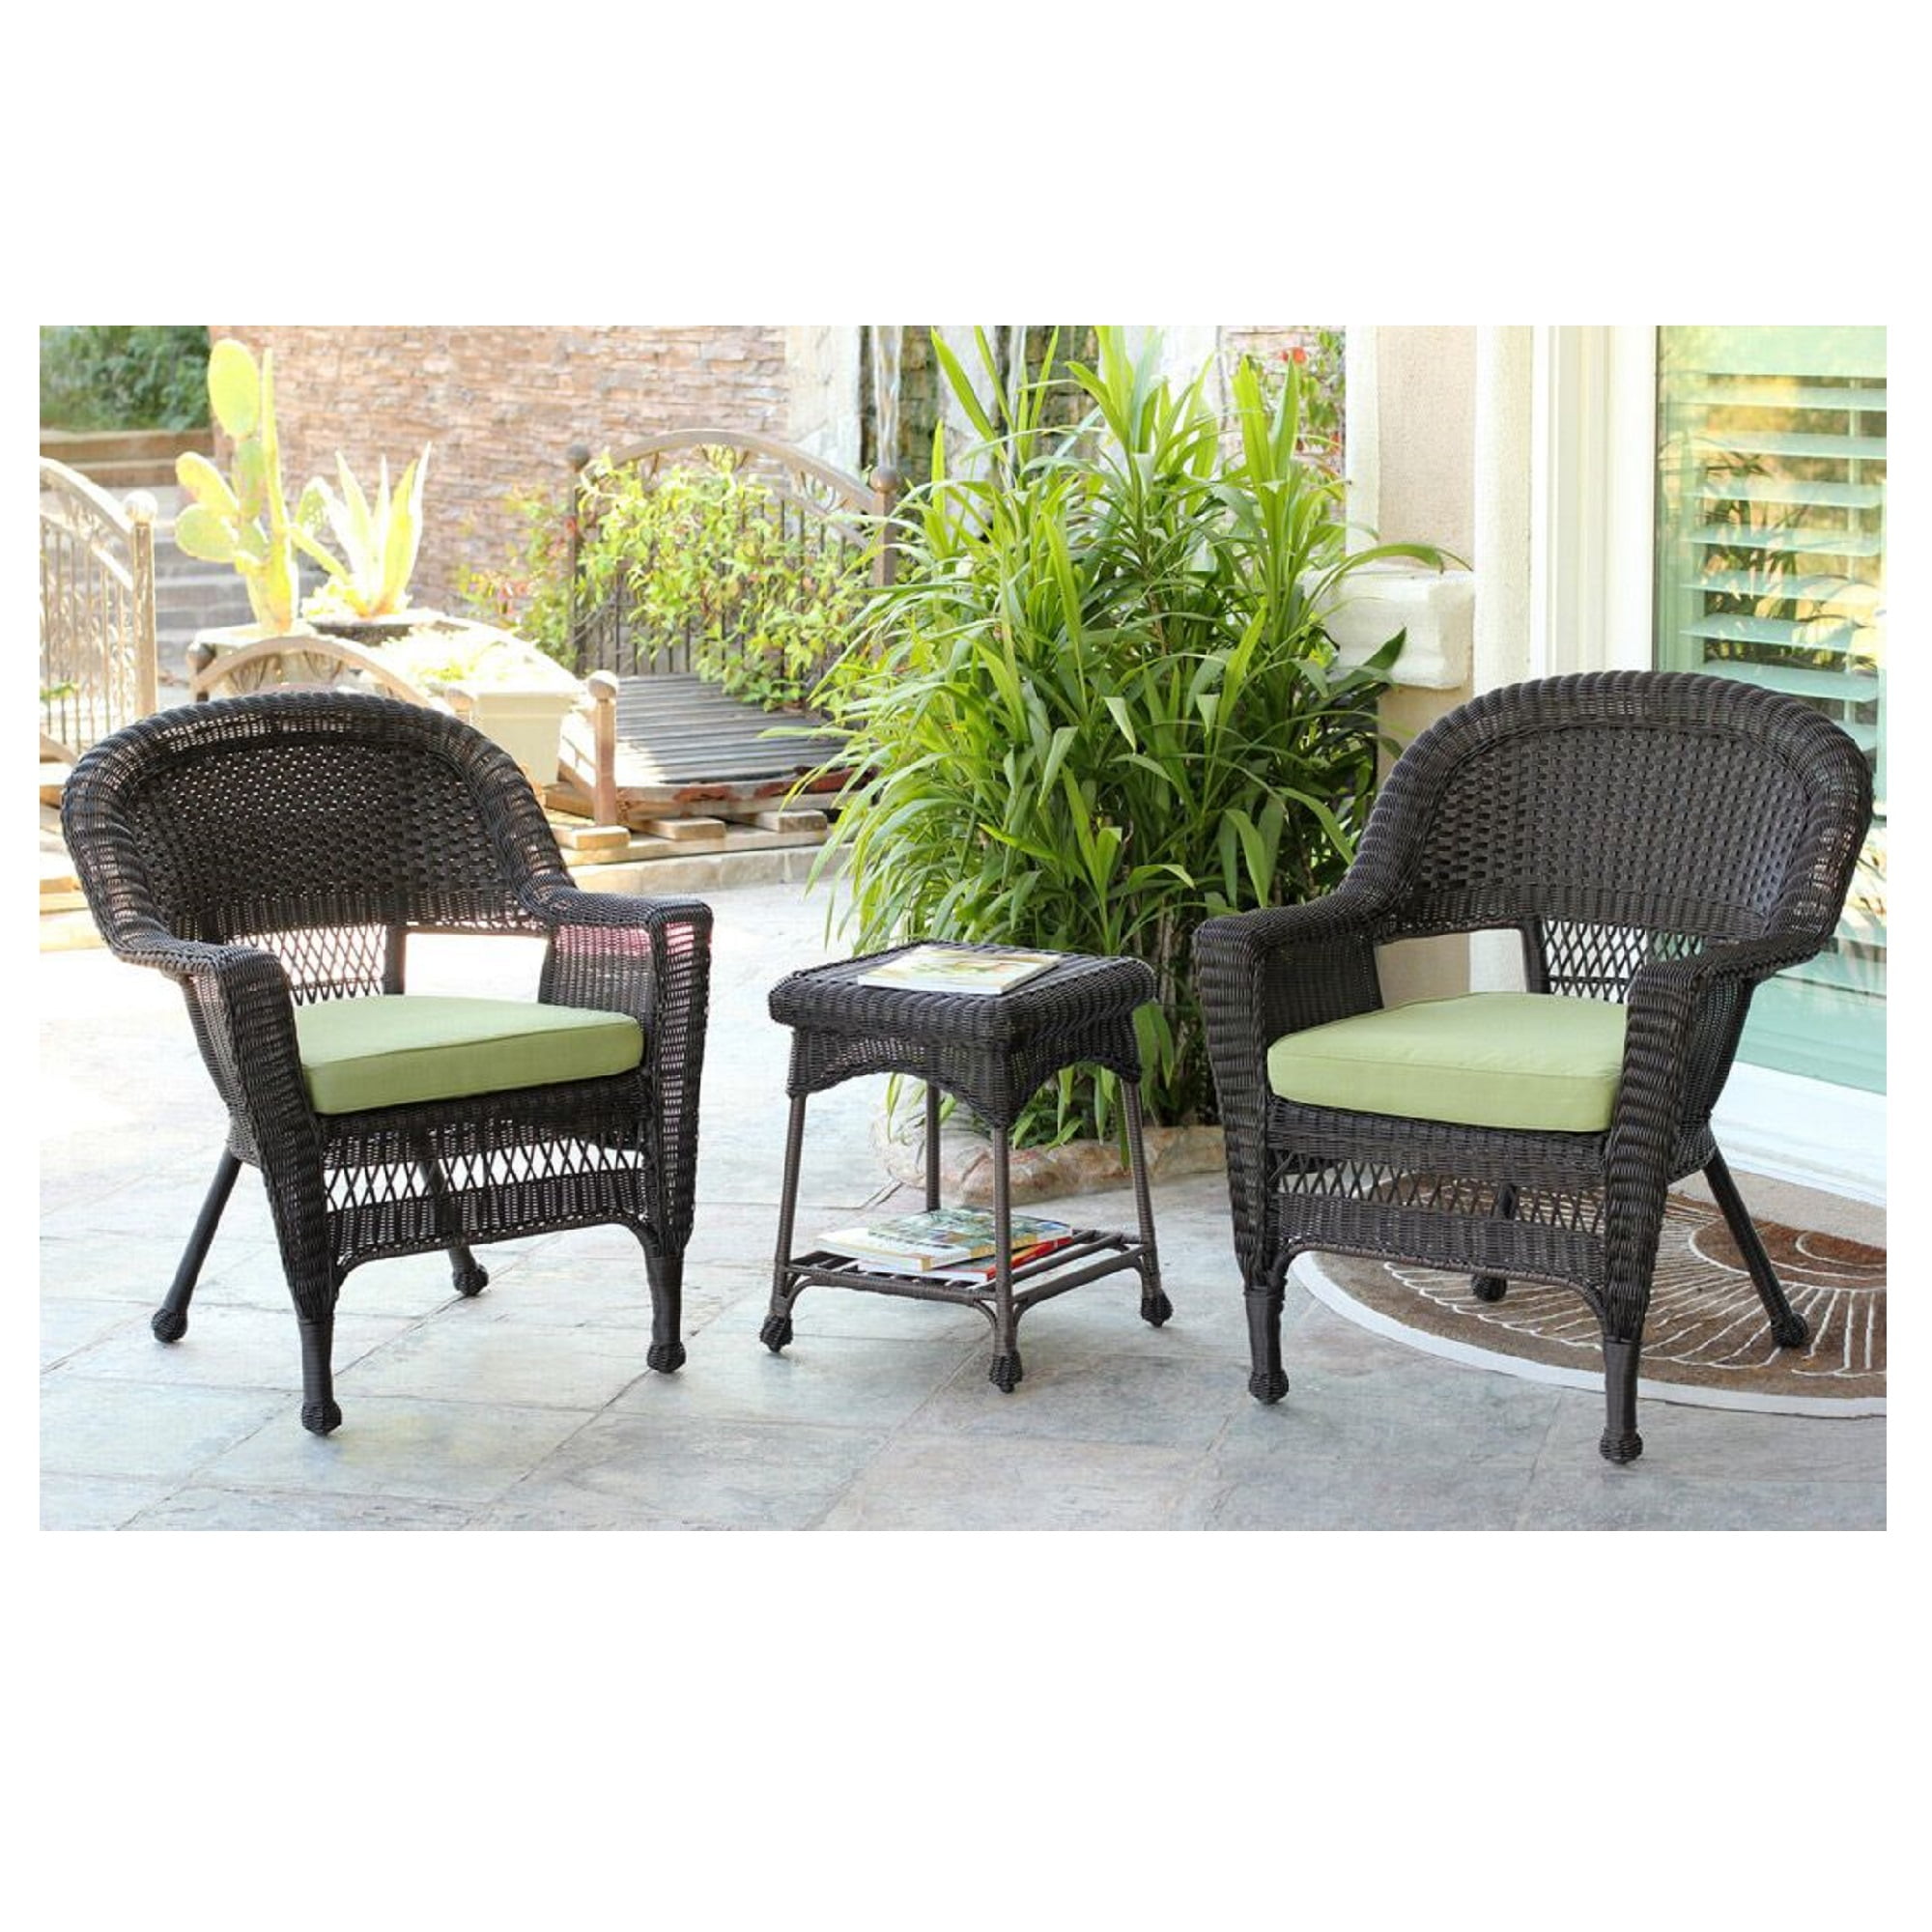 Set of 3 Espresso Brown Resin Wicker Patio Chairs and End